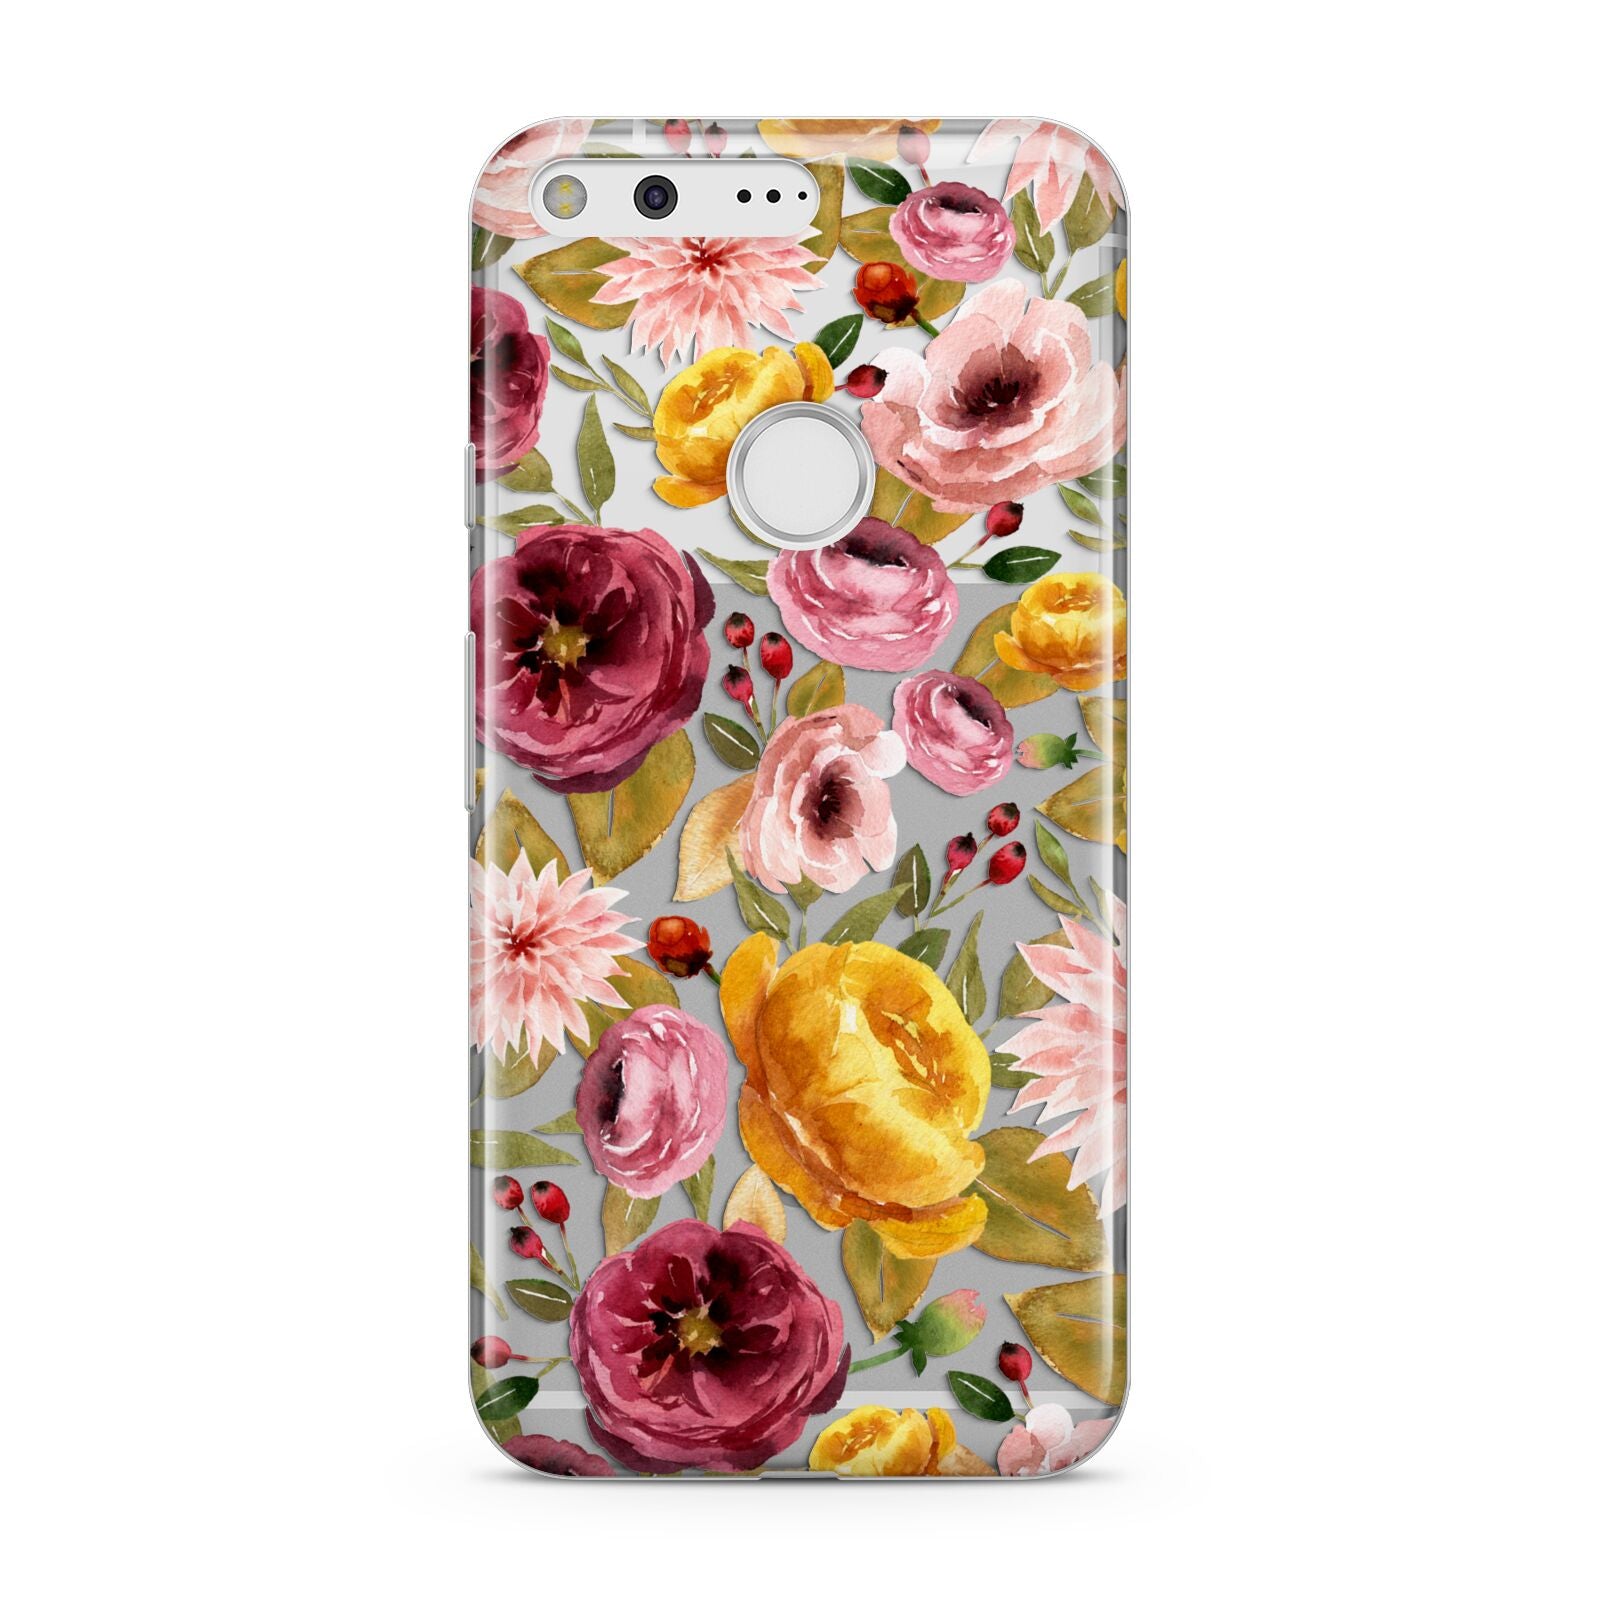 Clear Pink and Mustard Floral Google Pixel Case